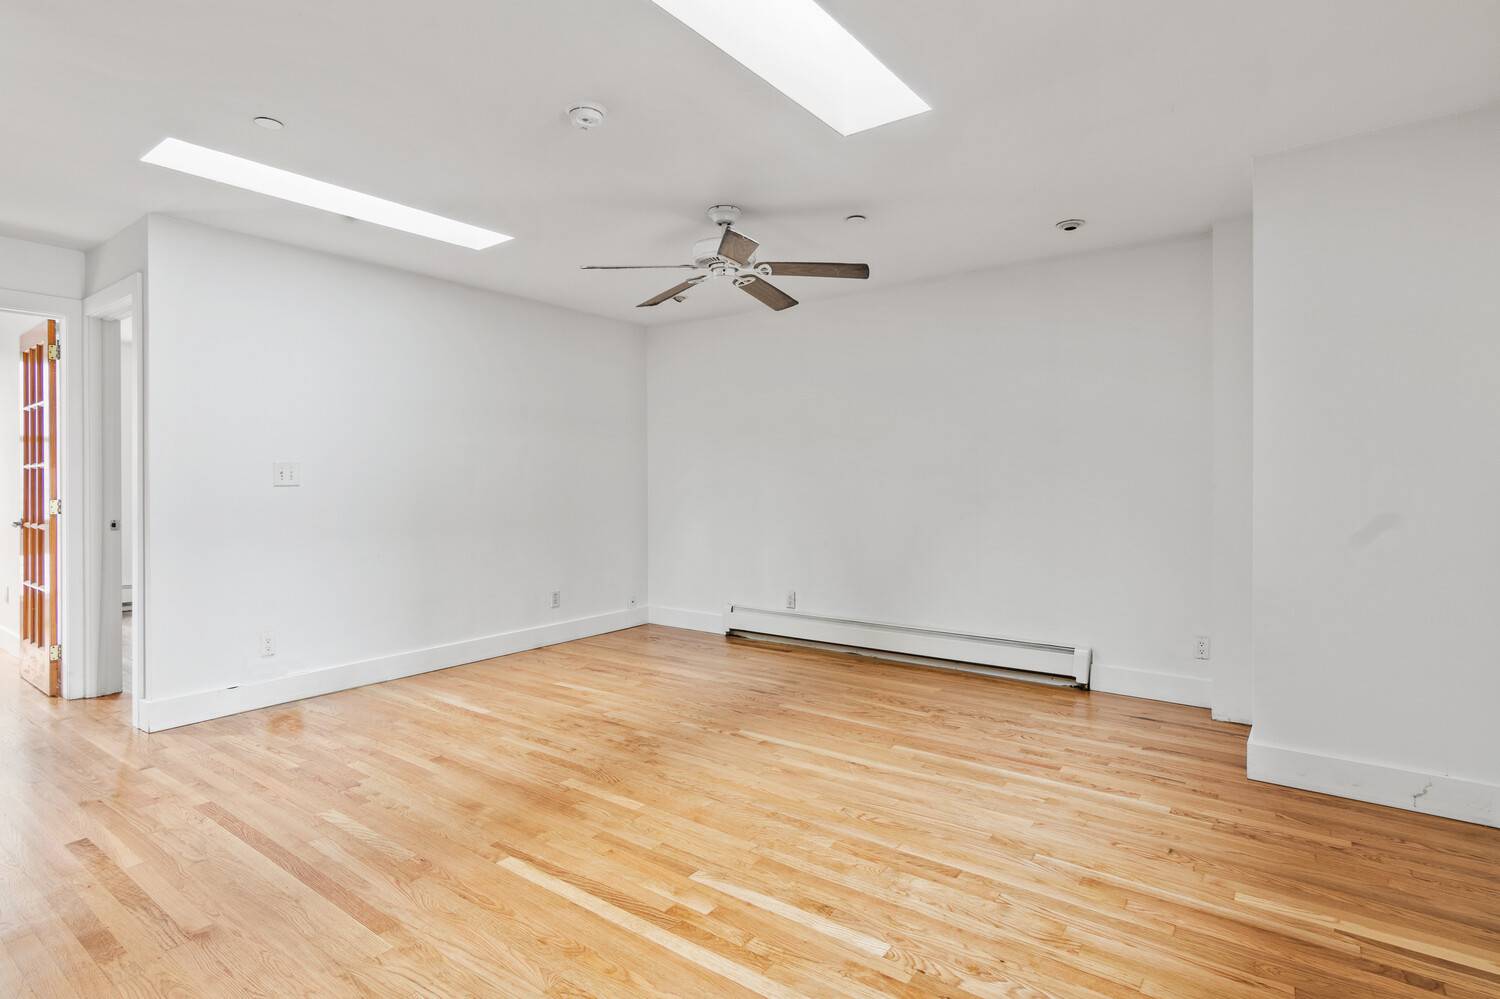 Location! Location! Location! Beautifully Renovated Apartment in the Heart of Williamsburg